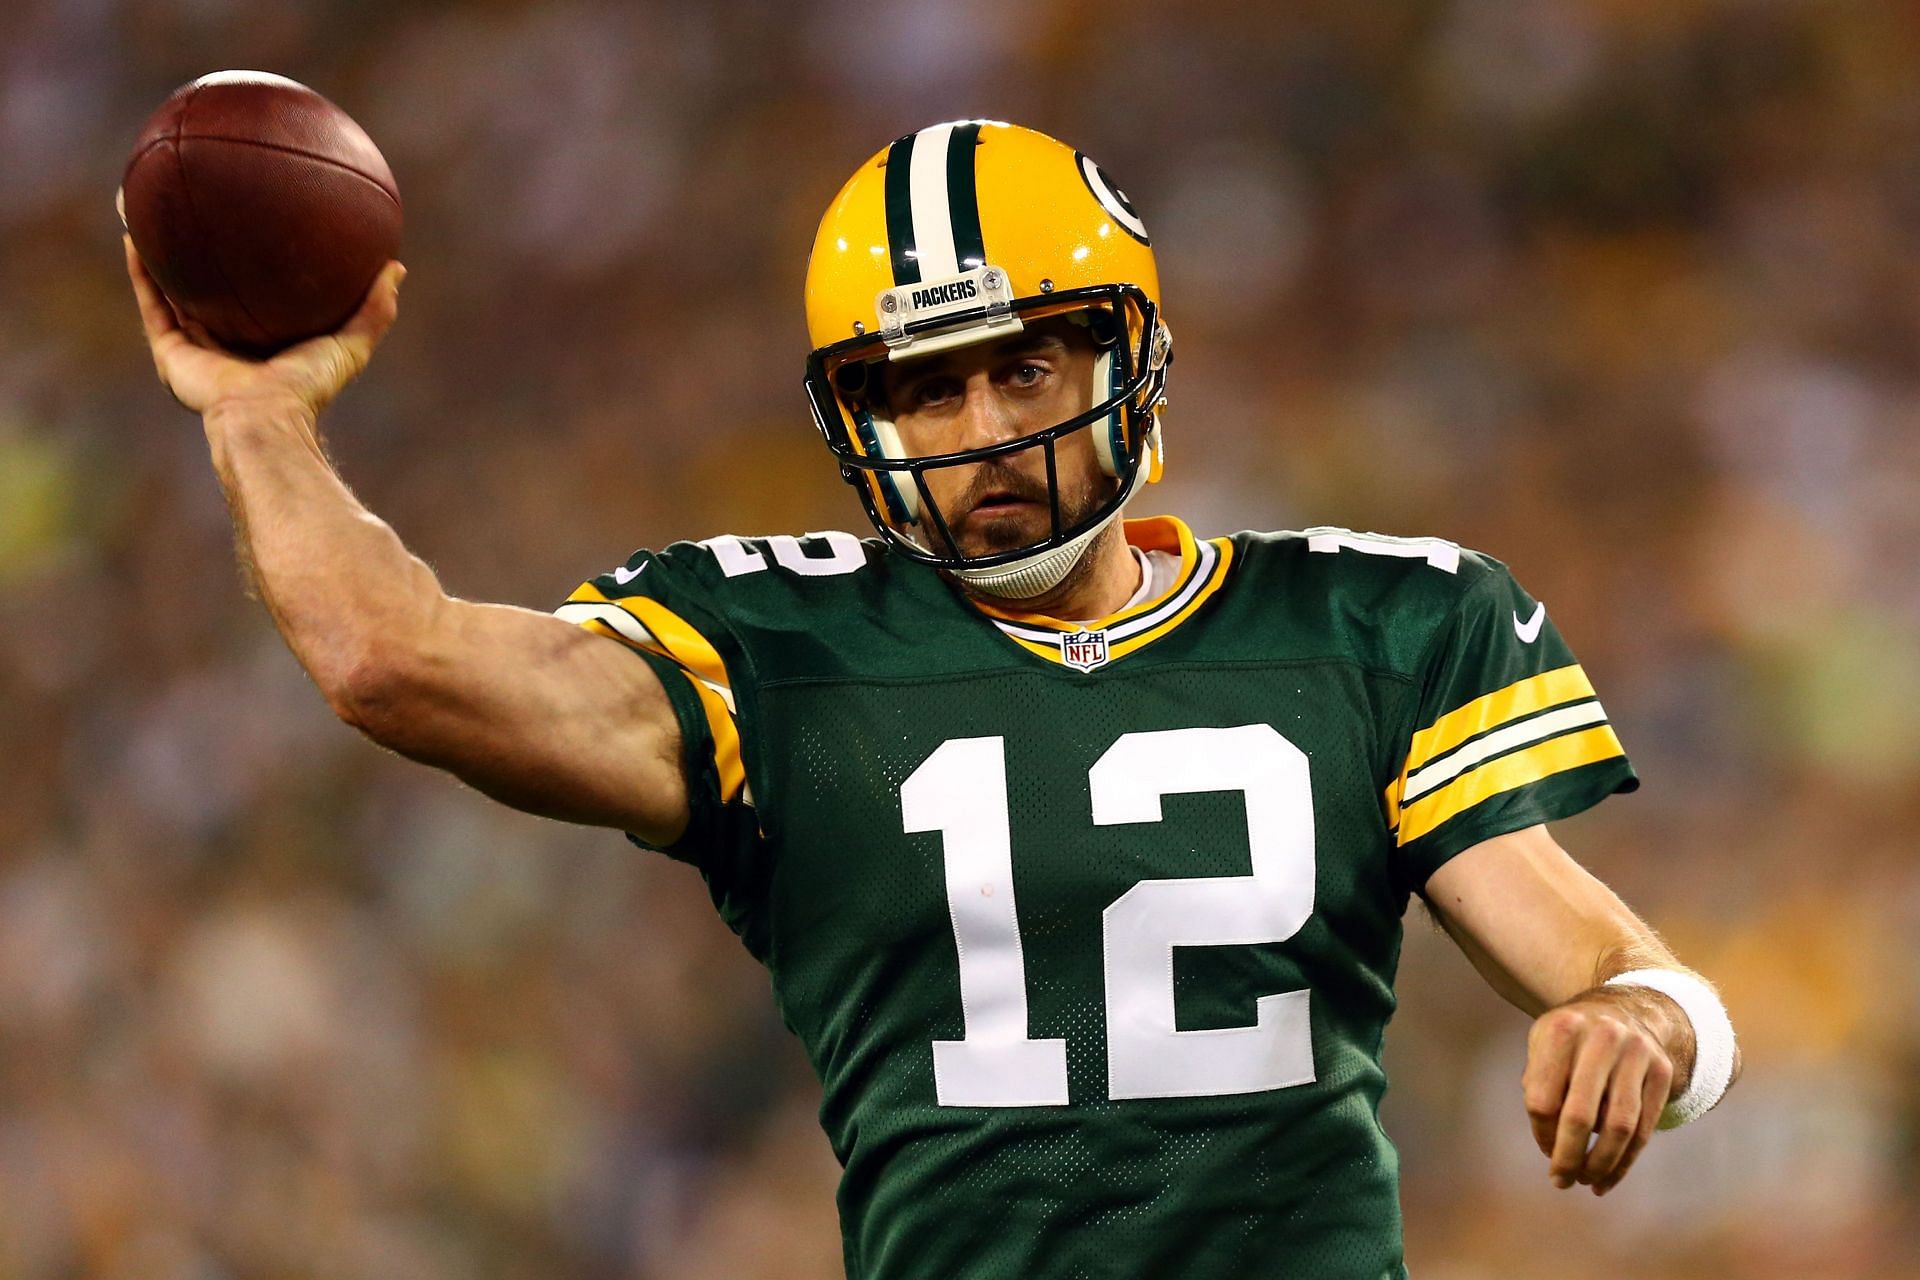 Green Bay Packers quarterback Aaron Rodgers may face discipline over use of an illegal substance